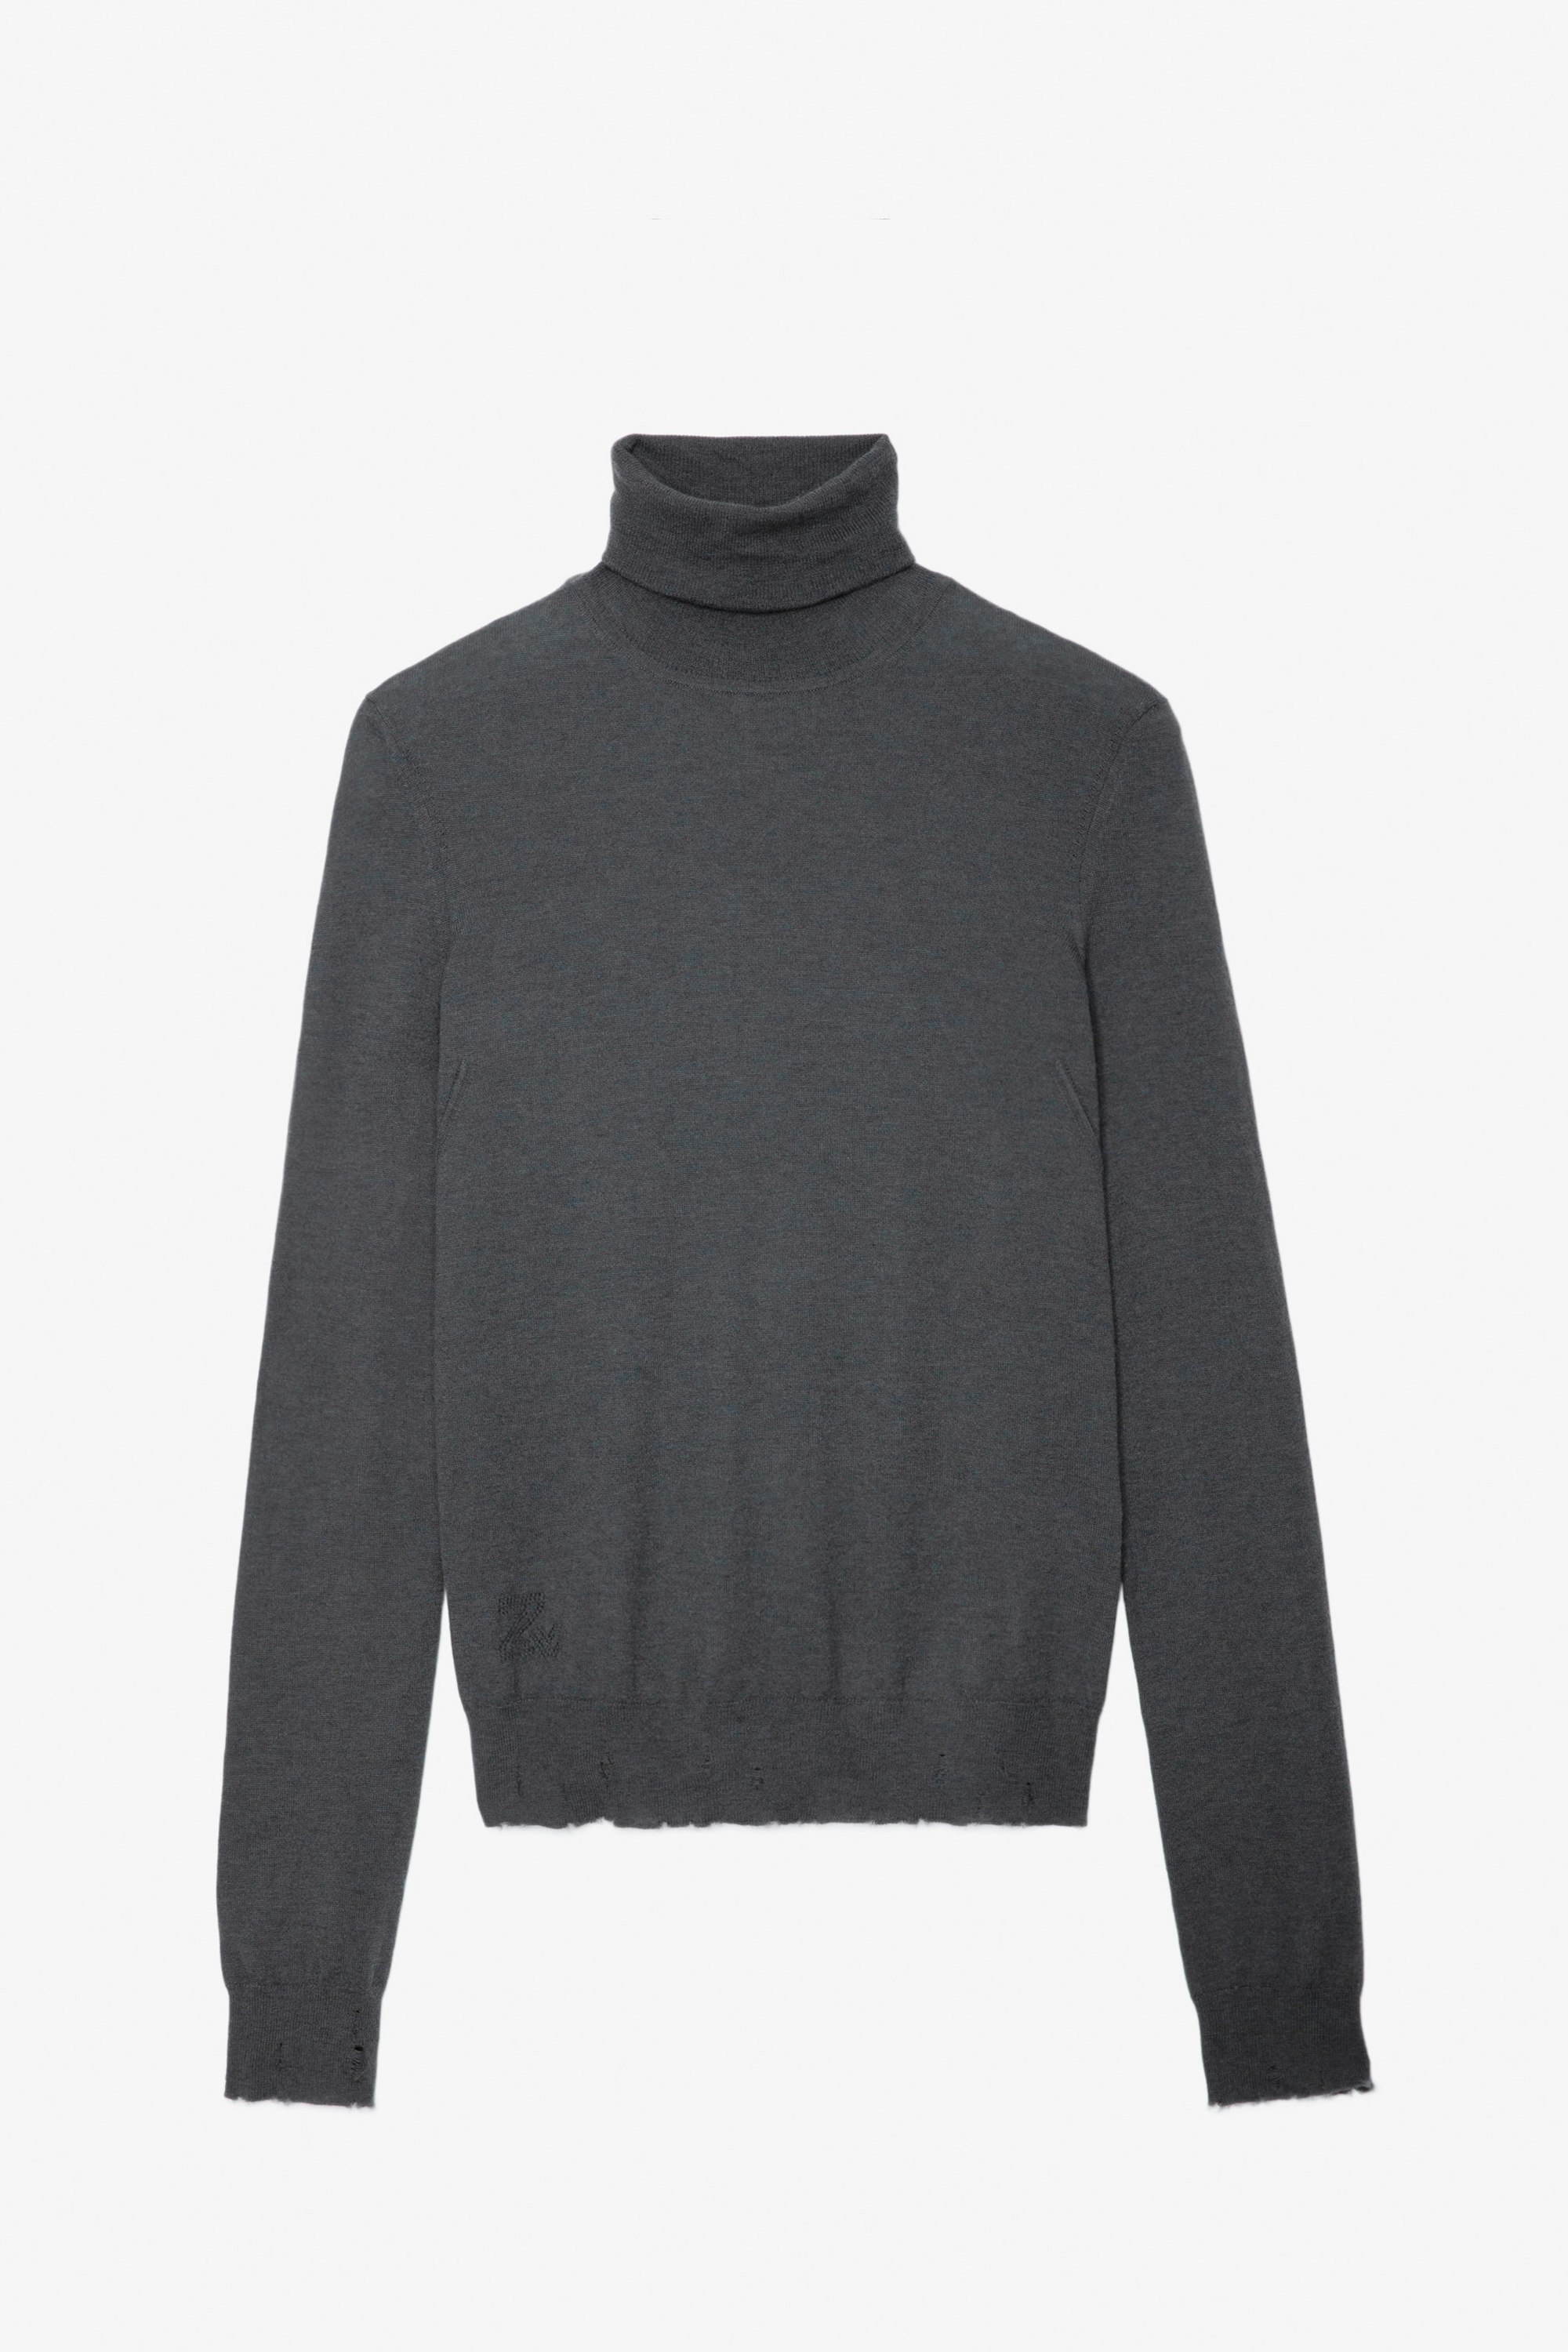 Bobby Cashmere Jumper - Women's Bobby grey feather cashmere turtleneck jumper with long sleeves.